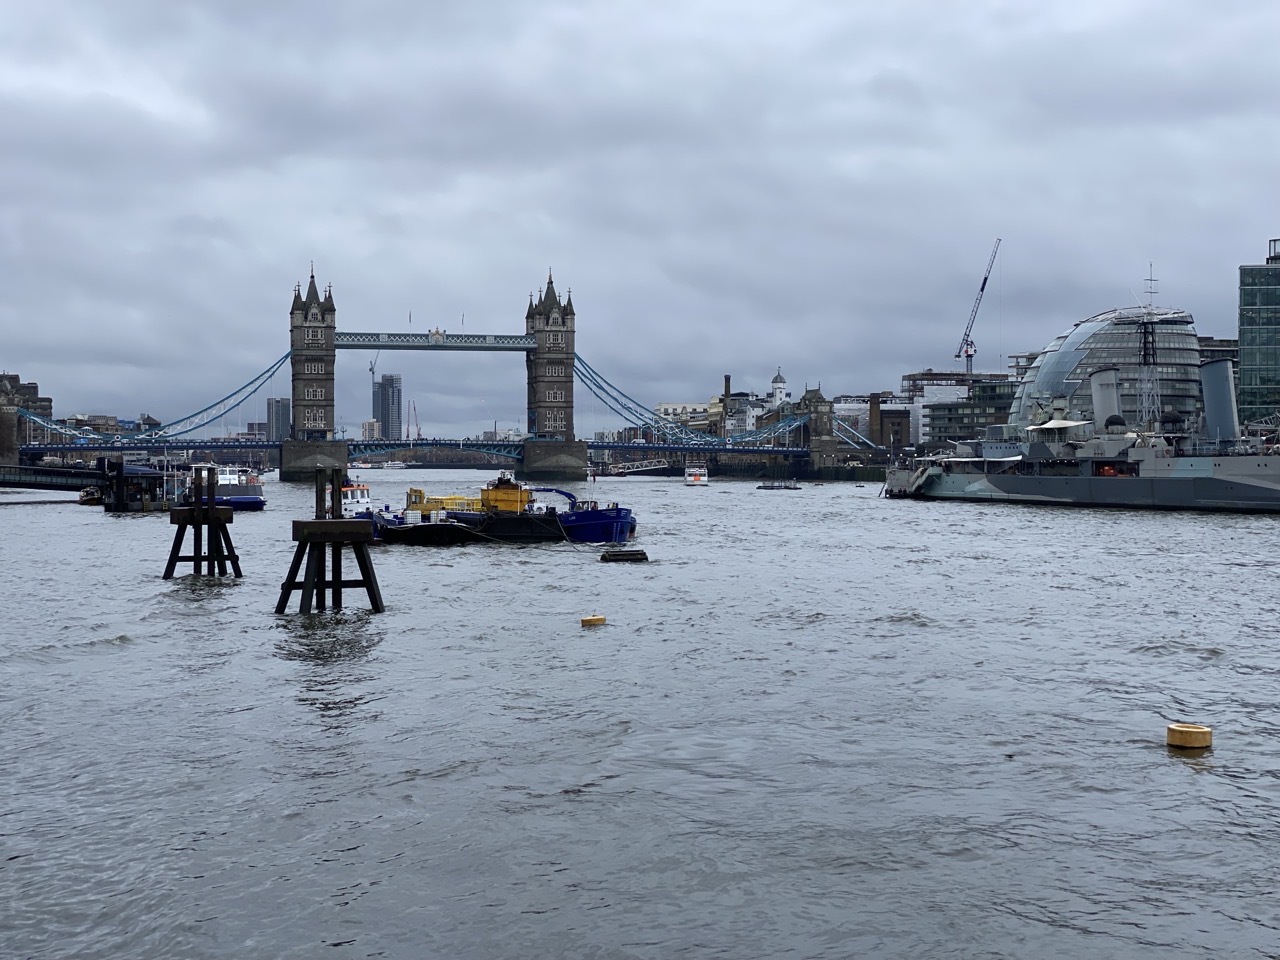 Tower Bridge and the River Thames. It’s a bit grey and rainy.